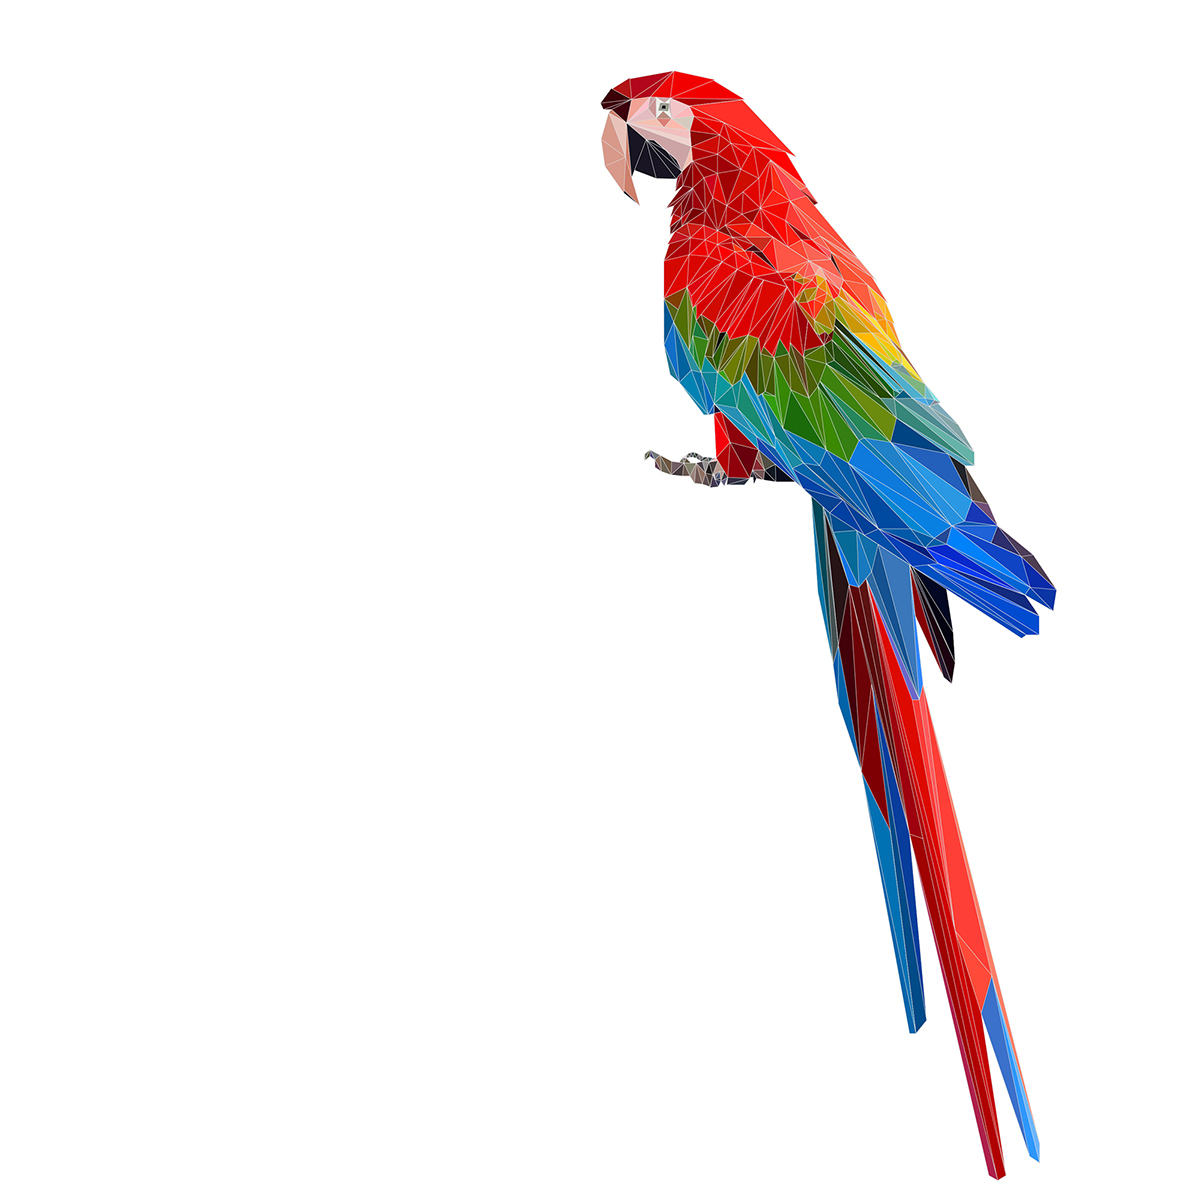 Low Poly lowpoly bird parrot Drawing  art ILLUSTRATION 